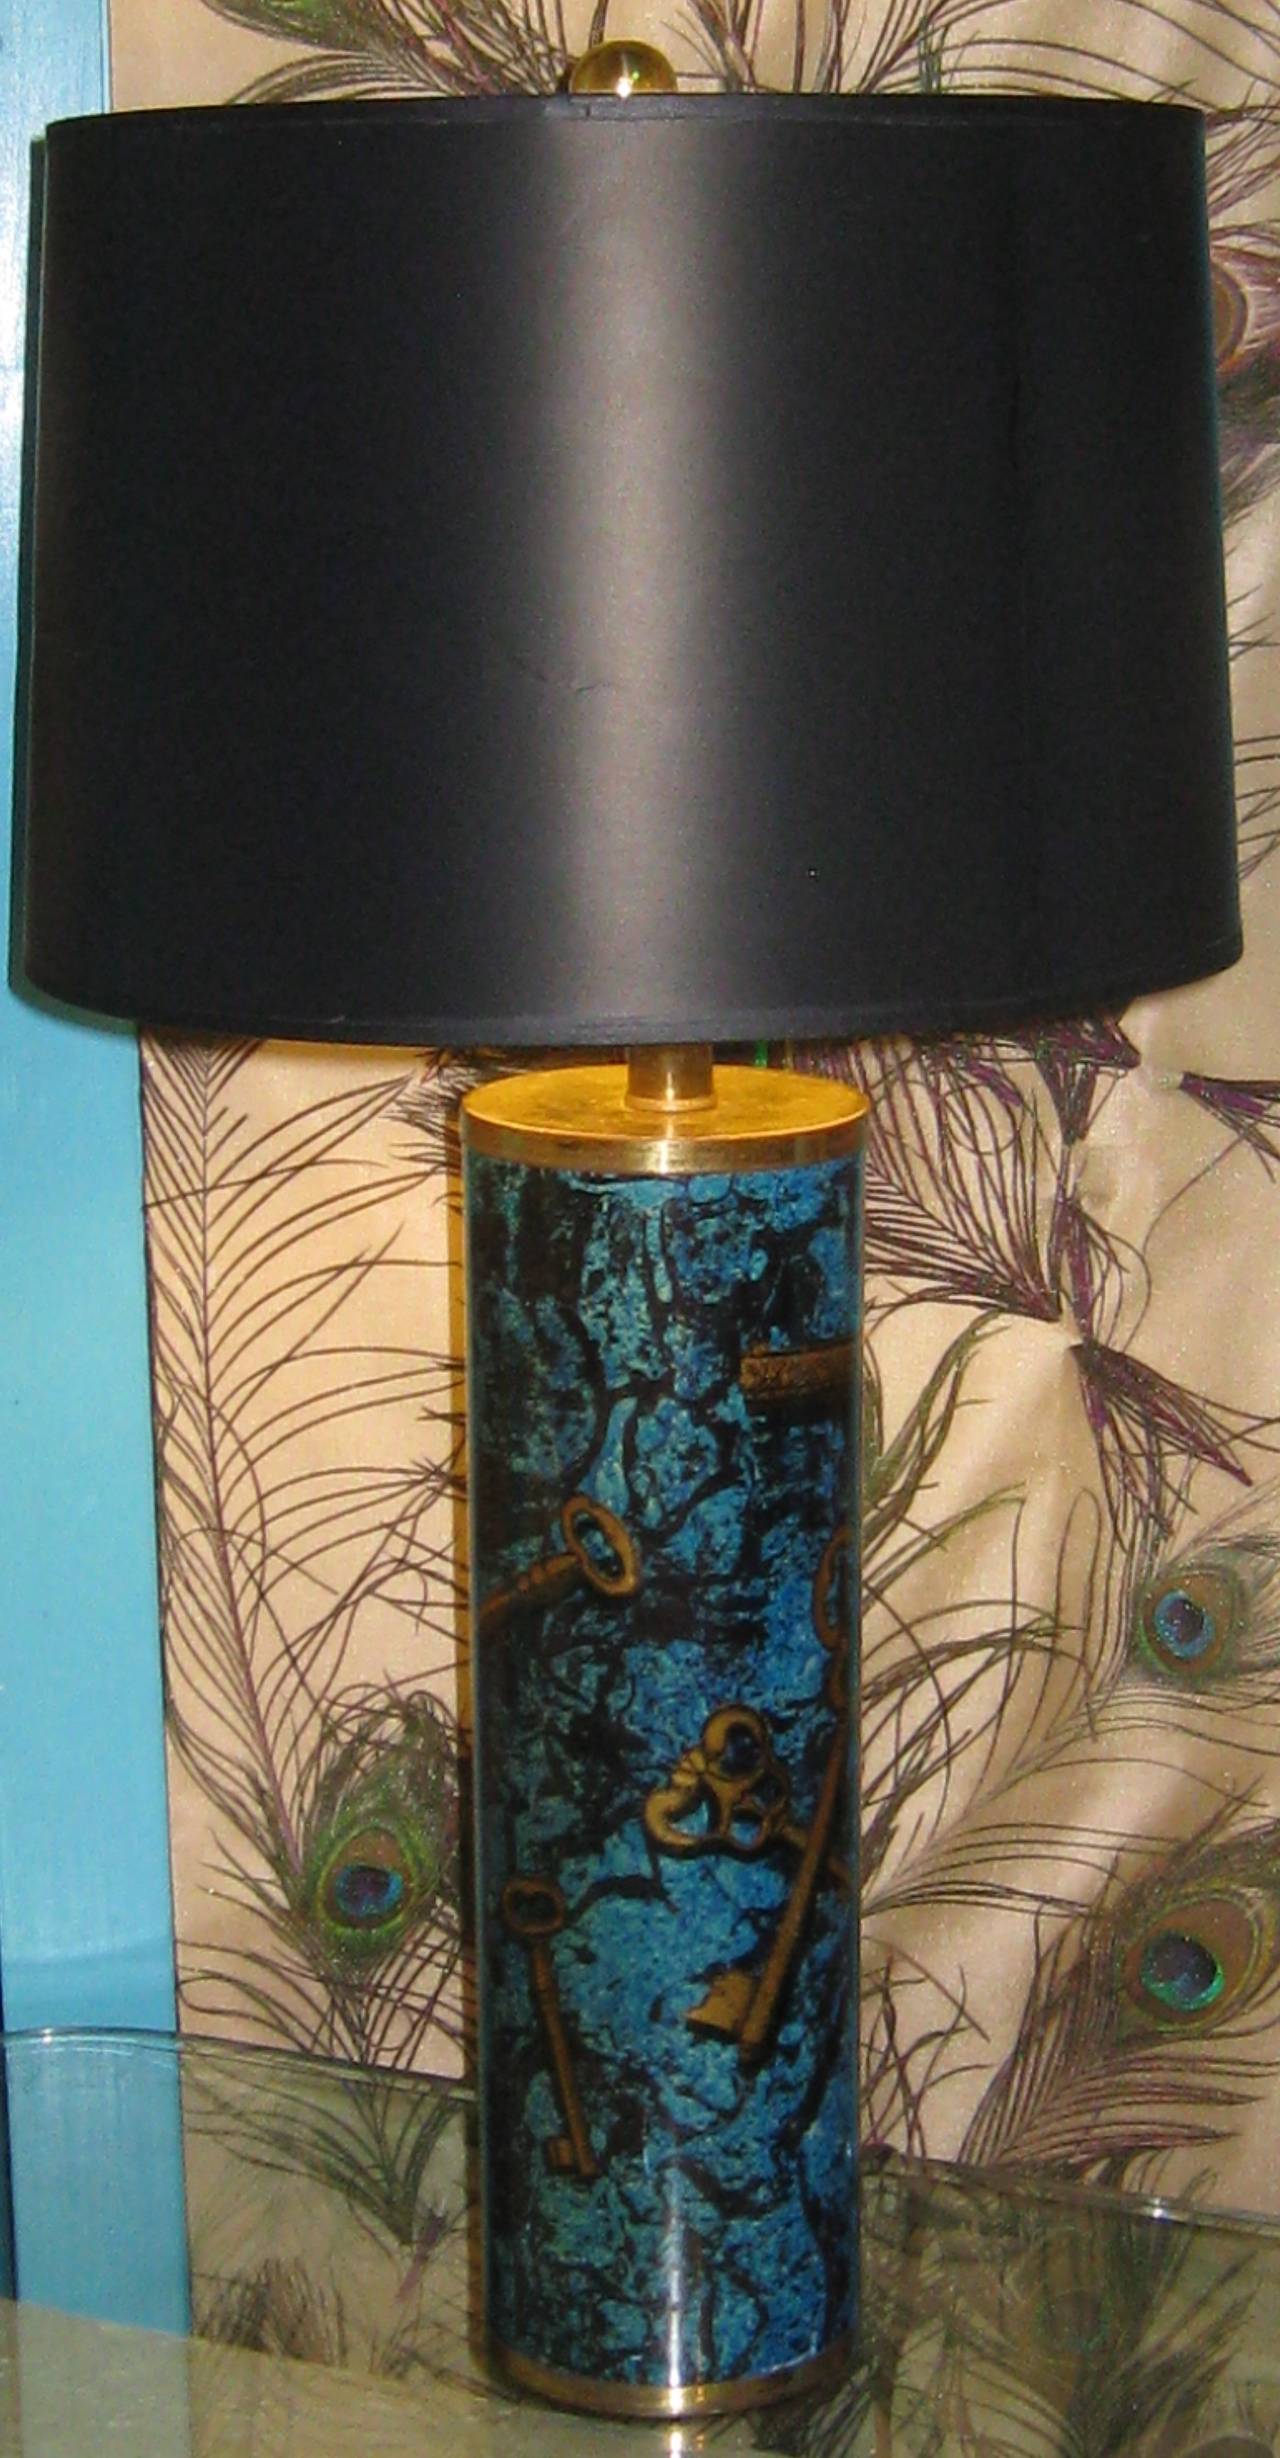 Italian mid-20th century ceramic lamp with transfer key design in the style of Piero Fornasetti. Original paper label on the underside. Fabulous turquoise color.